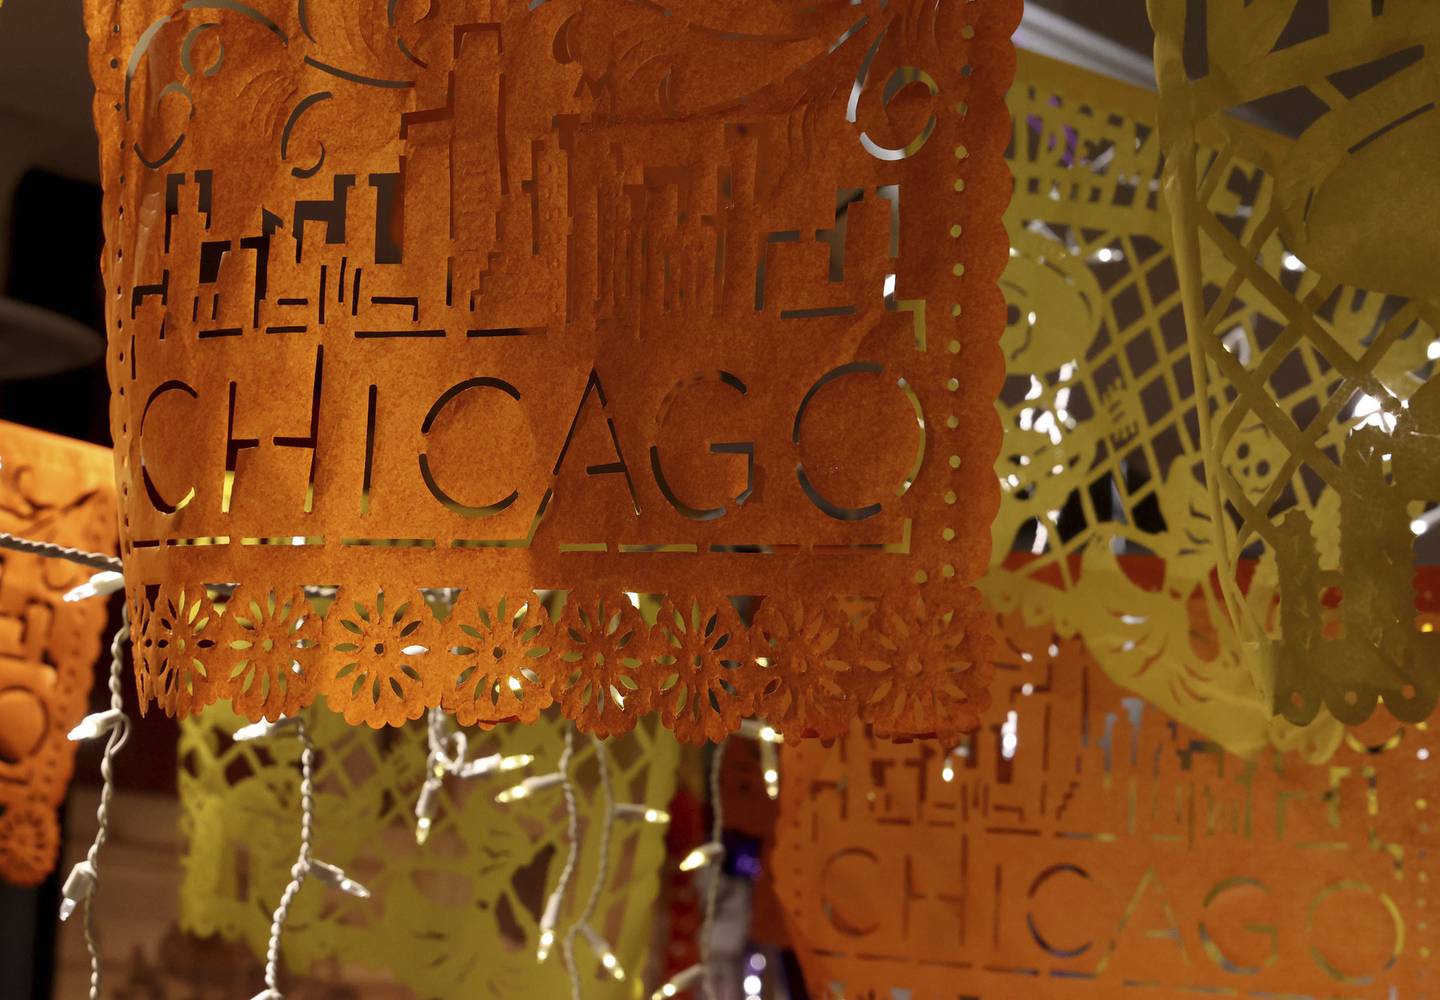 Papel Picado, a type of punched or perforated tissue paper, with images of Chicago and Day of the Dead figures is sold at Colores Mexicanos.